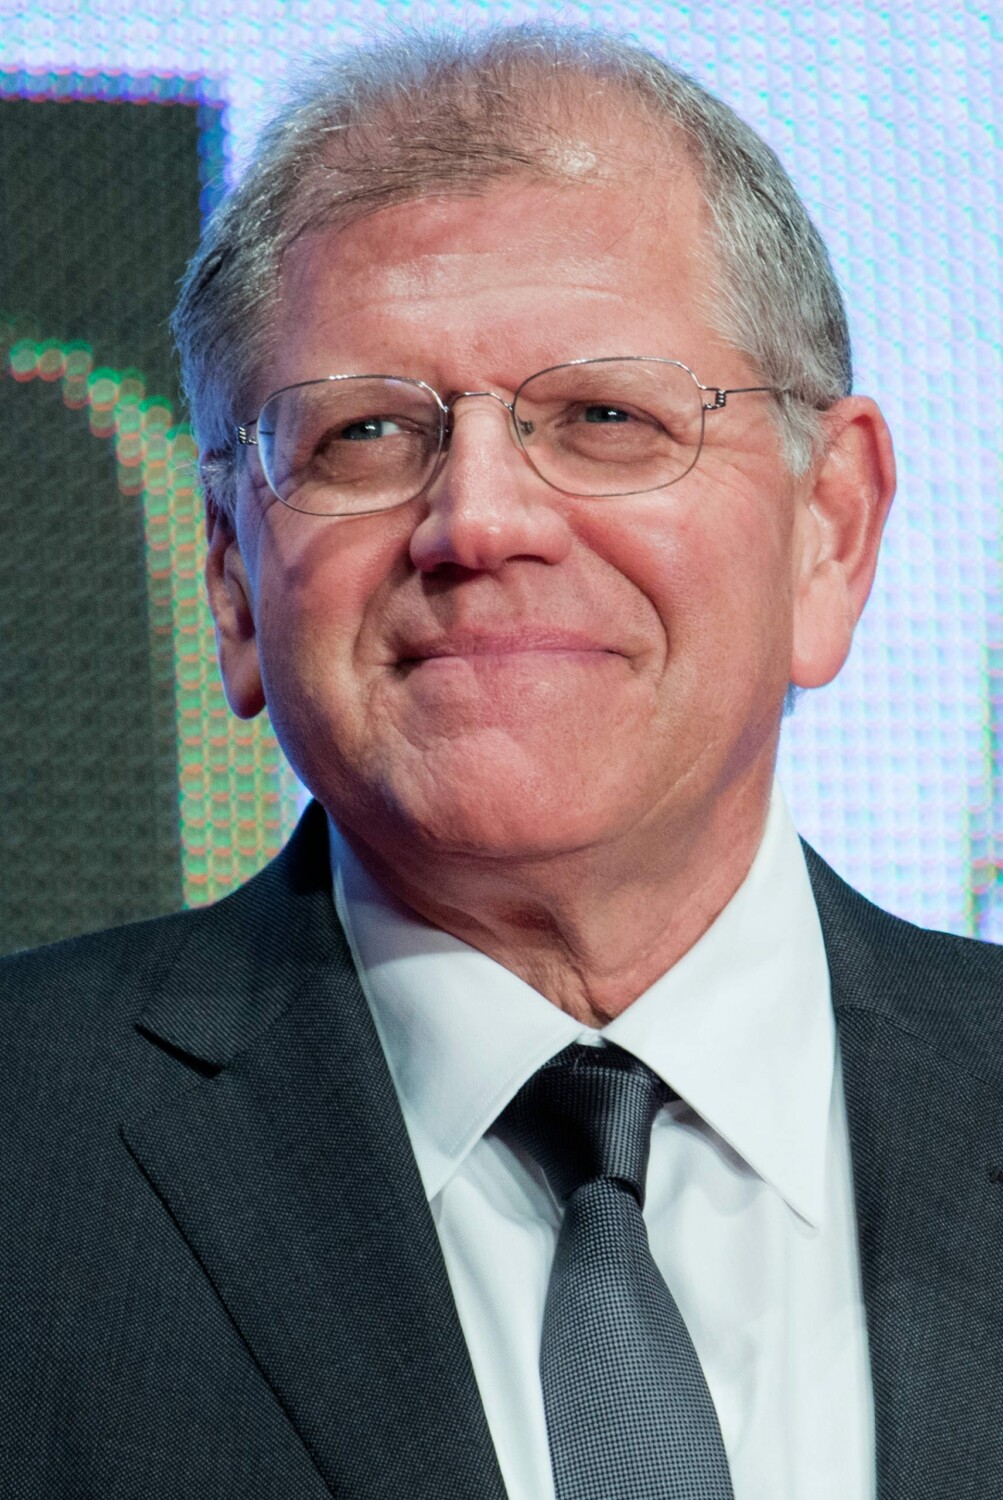 Robert Zemeckis. By Dick Thomas Johnson from Tokyo, Japan - Robert Zemeckis "The Walk" at Opening Ceremony of the 28th Tokyo International Film Festival, CC BY 2.0, https://commons.wikimedia.org/w/index.php?curid=44565229